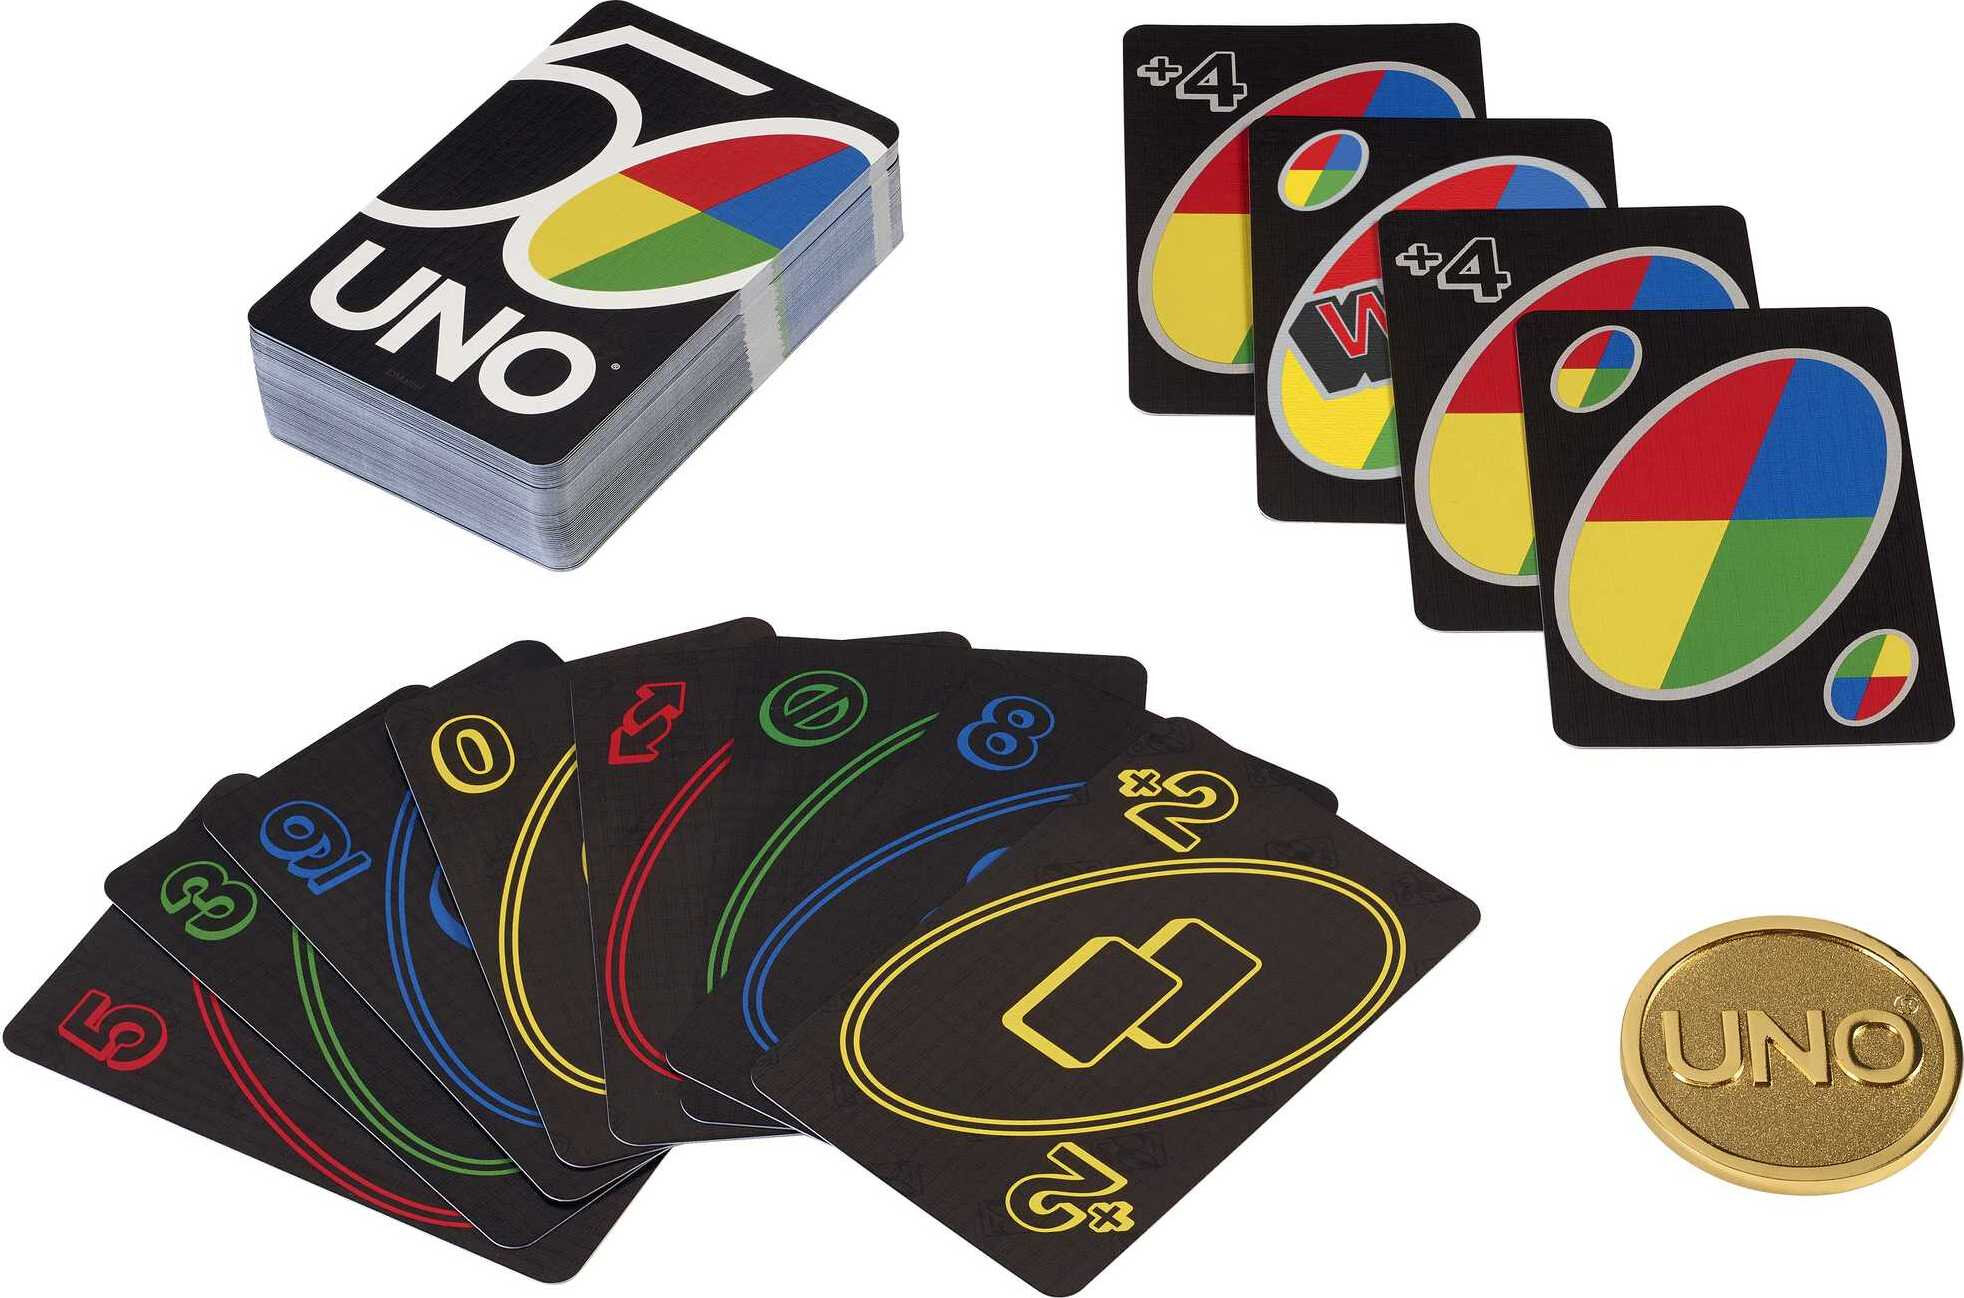 UNO Card Game for Kids, Adults and Game Night with Special Wild Cards and Anniversary Gold Coin - image 1 of 7